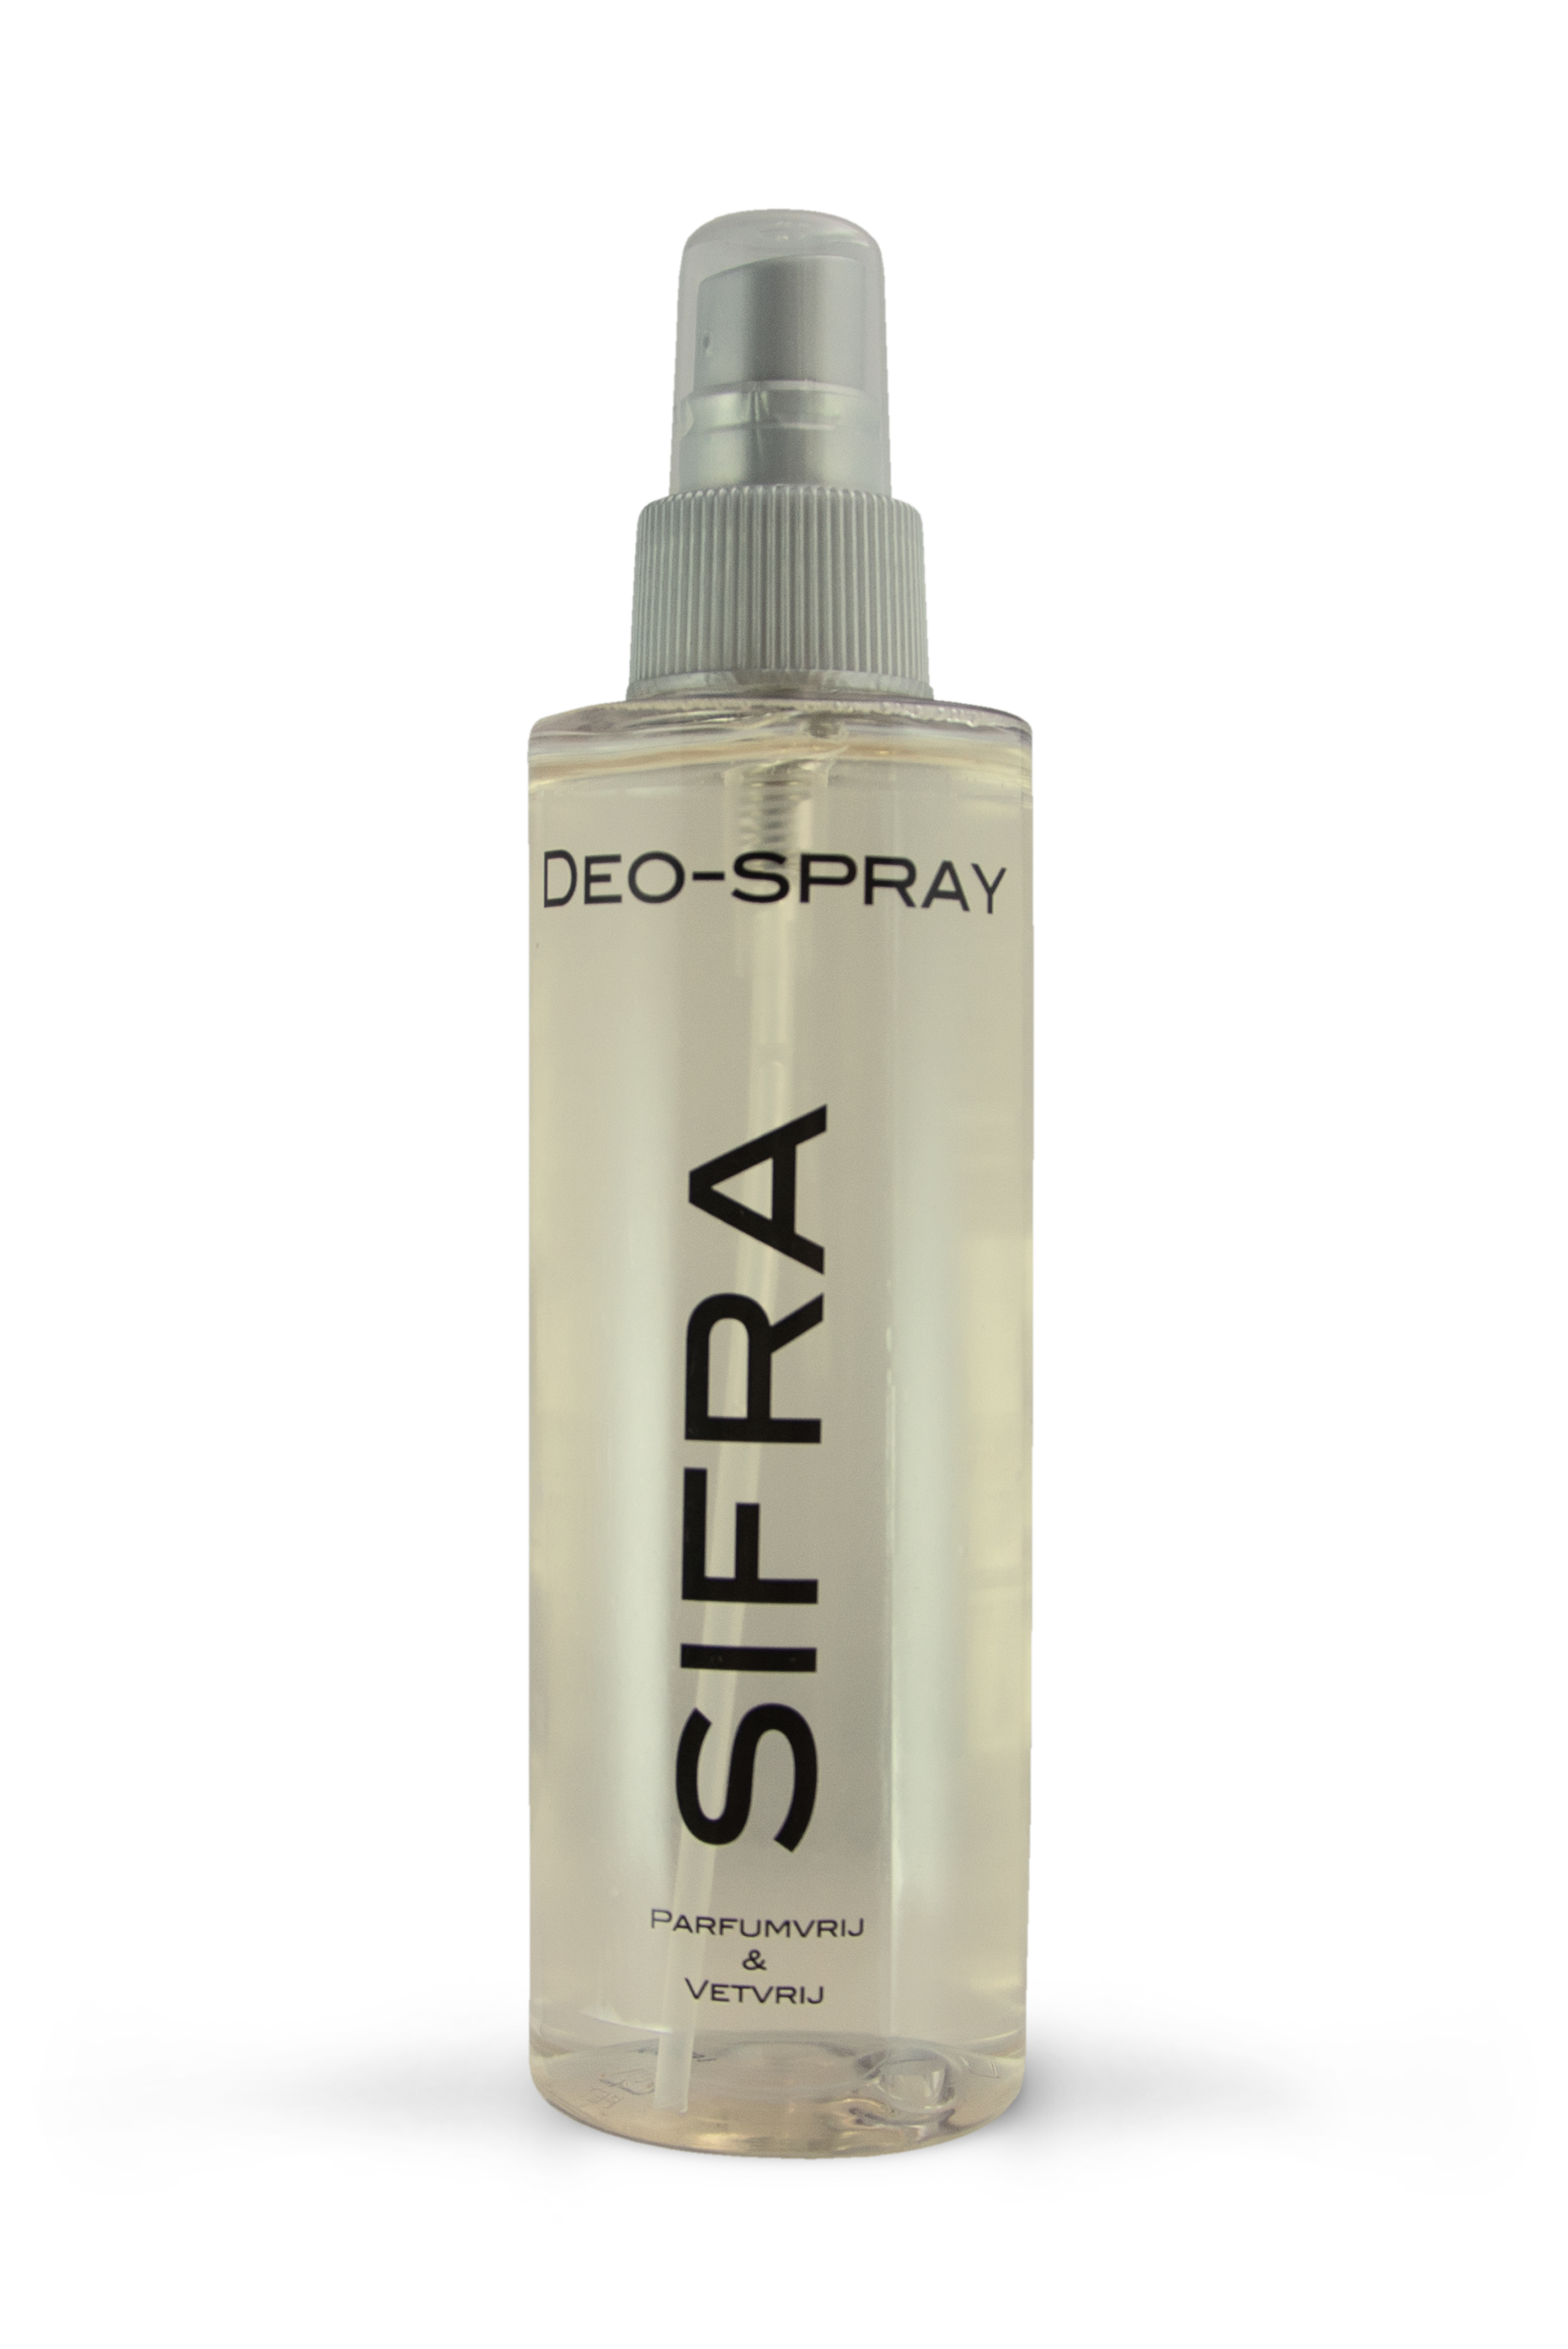 spectrum Kort leven pot Deo-spray - Sifra Beauty Products